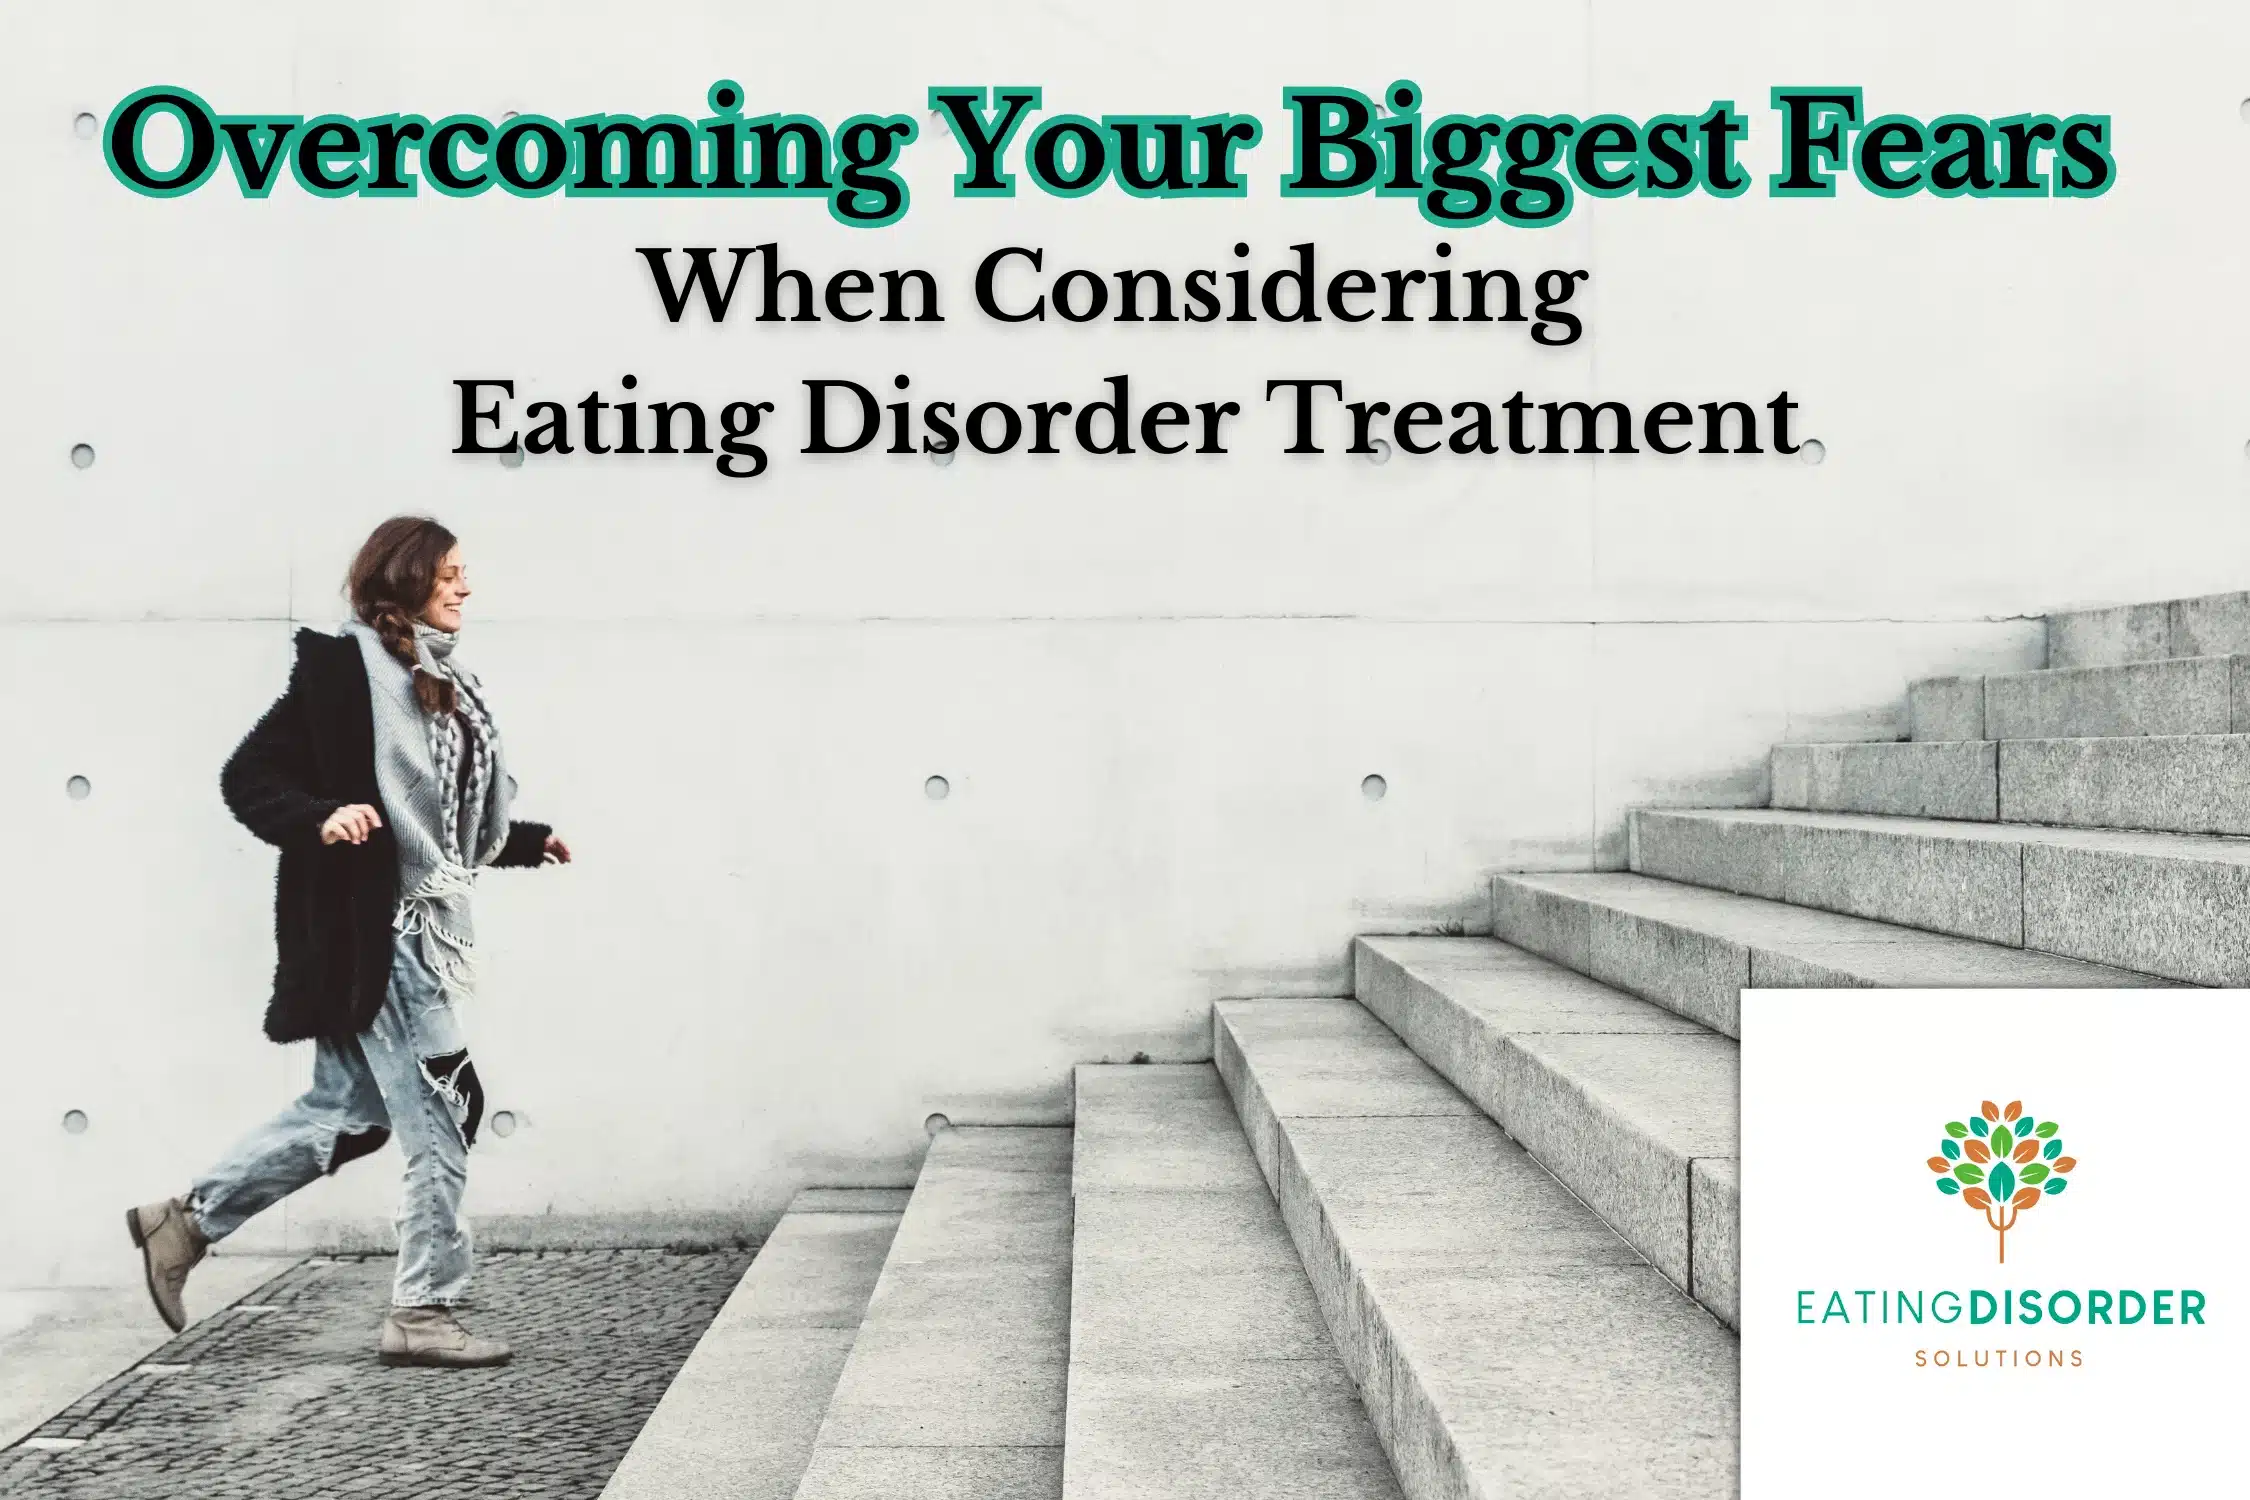 Fear of Eating Disorder Treatment